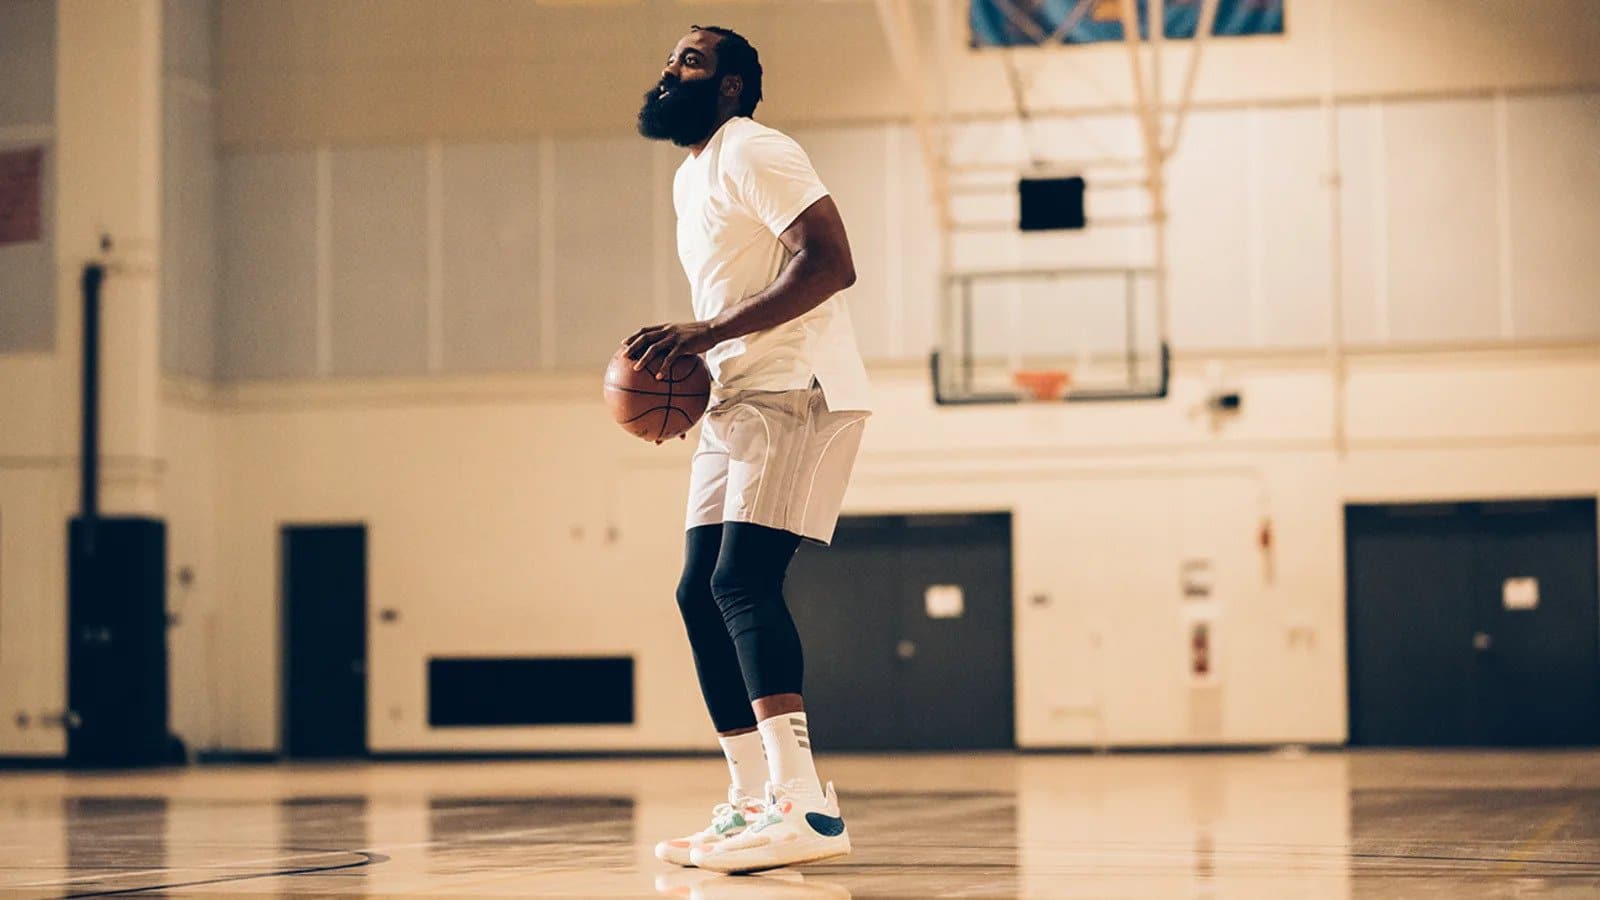 Harden Vol. 4: Free to Create - adidas Email Archive